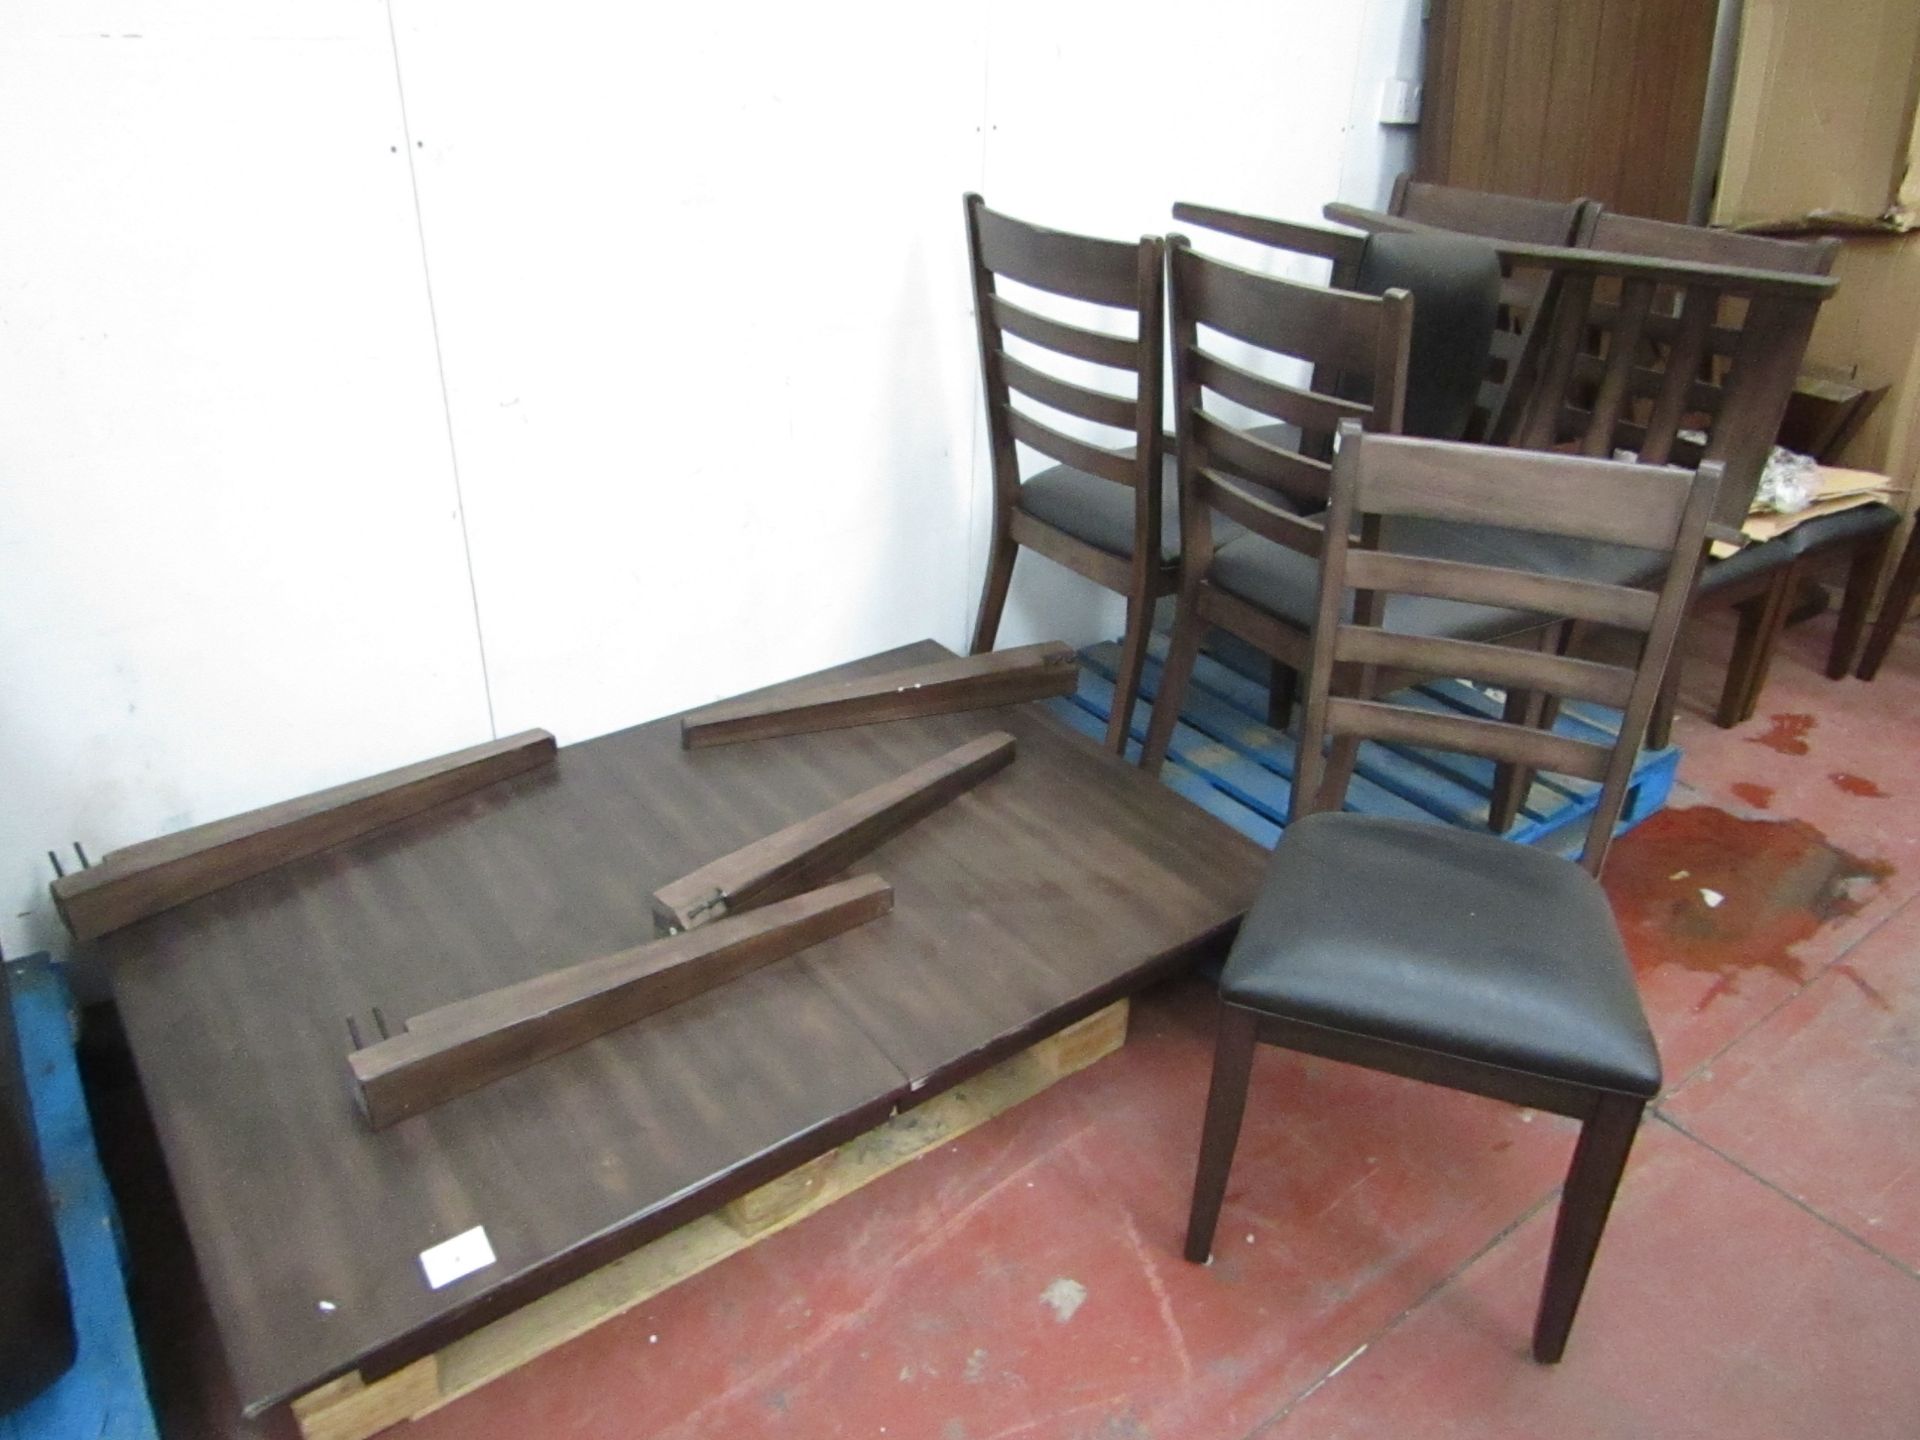 7 piece Dining Set, Complete apart from bolts for legs, The are a few scuffs but no major damage.